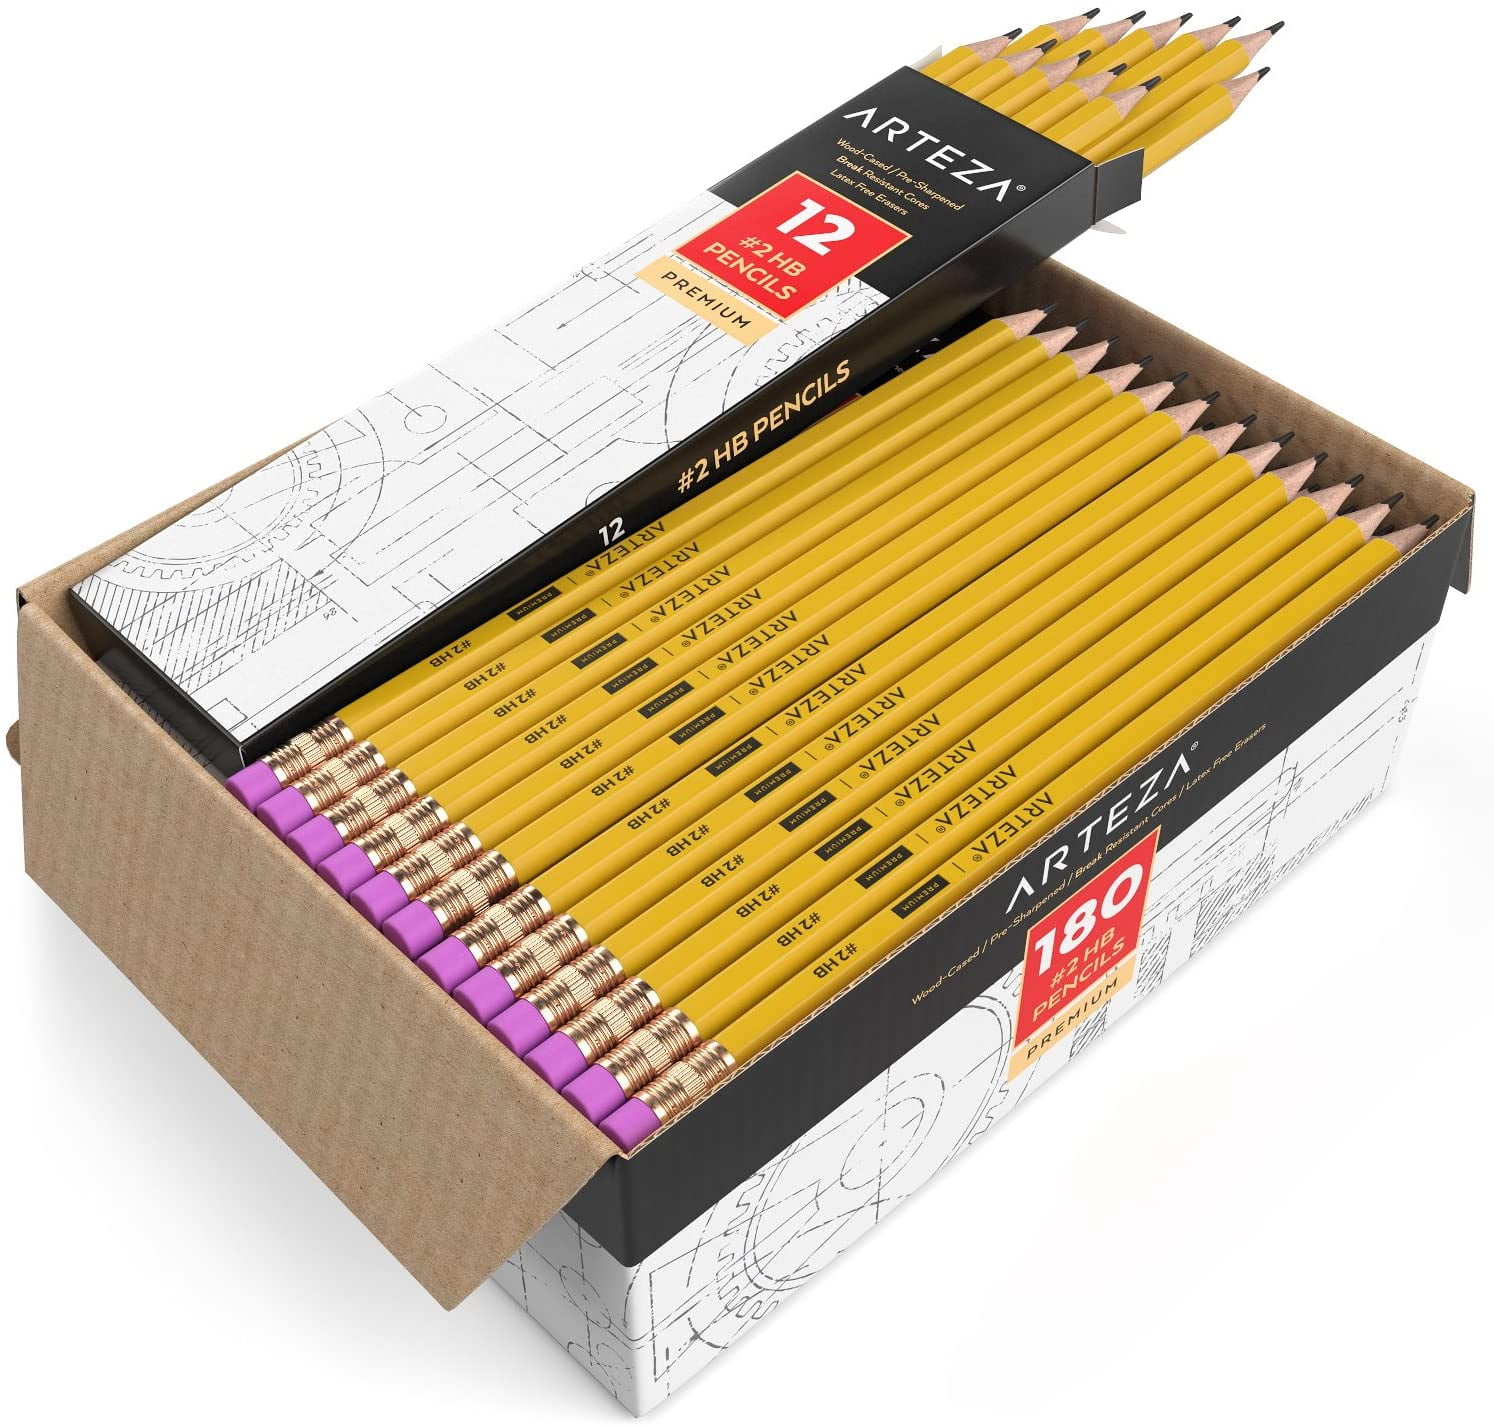 By Essential Arts Eco Friendly Responsibly Sourced Wood Office and DIY Class Pack of 144 HB Wooden C2 Hexagonal Drawing and Sketching Pencils with Eraser for School Classroom